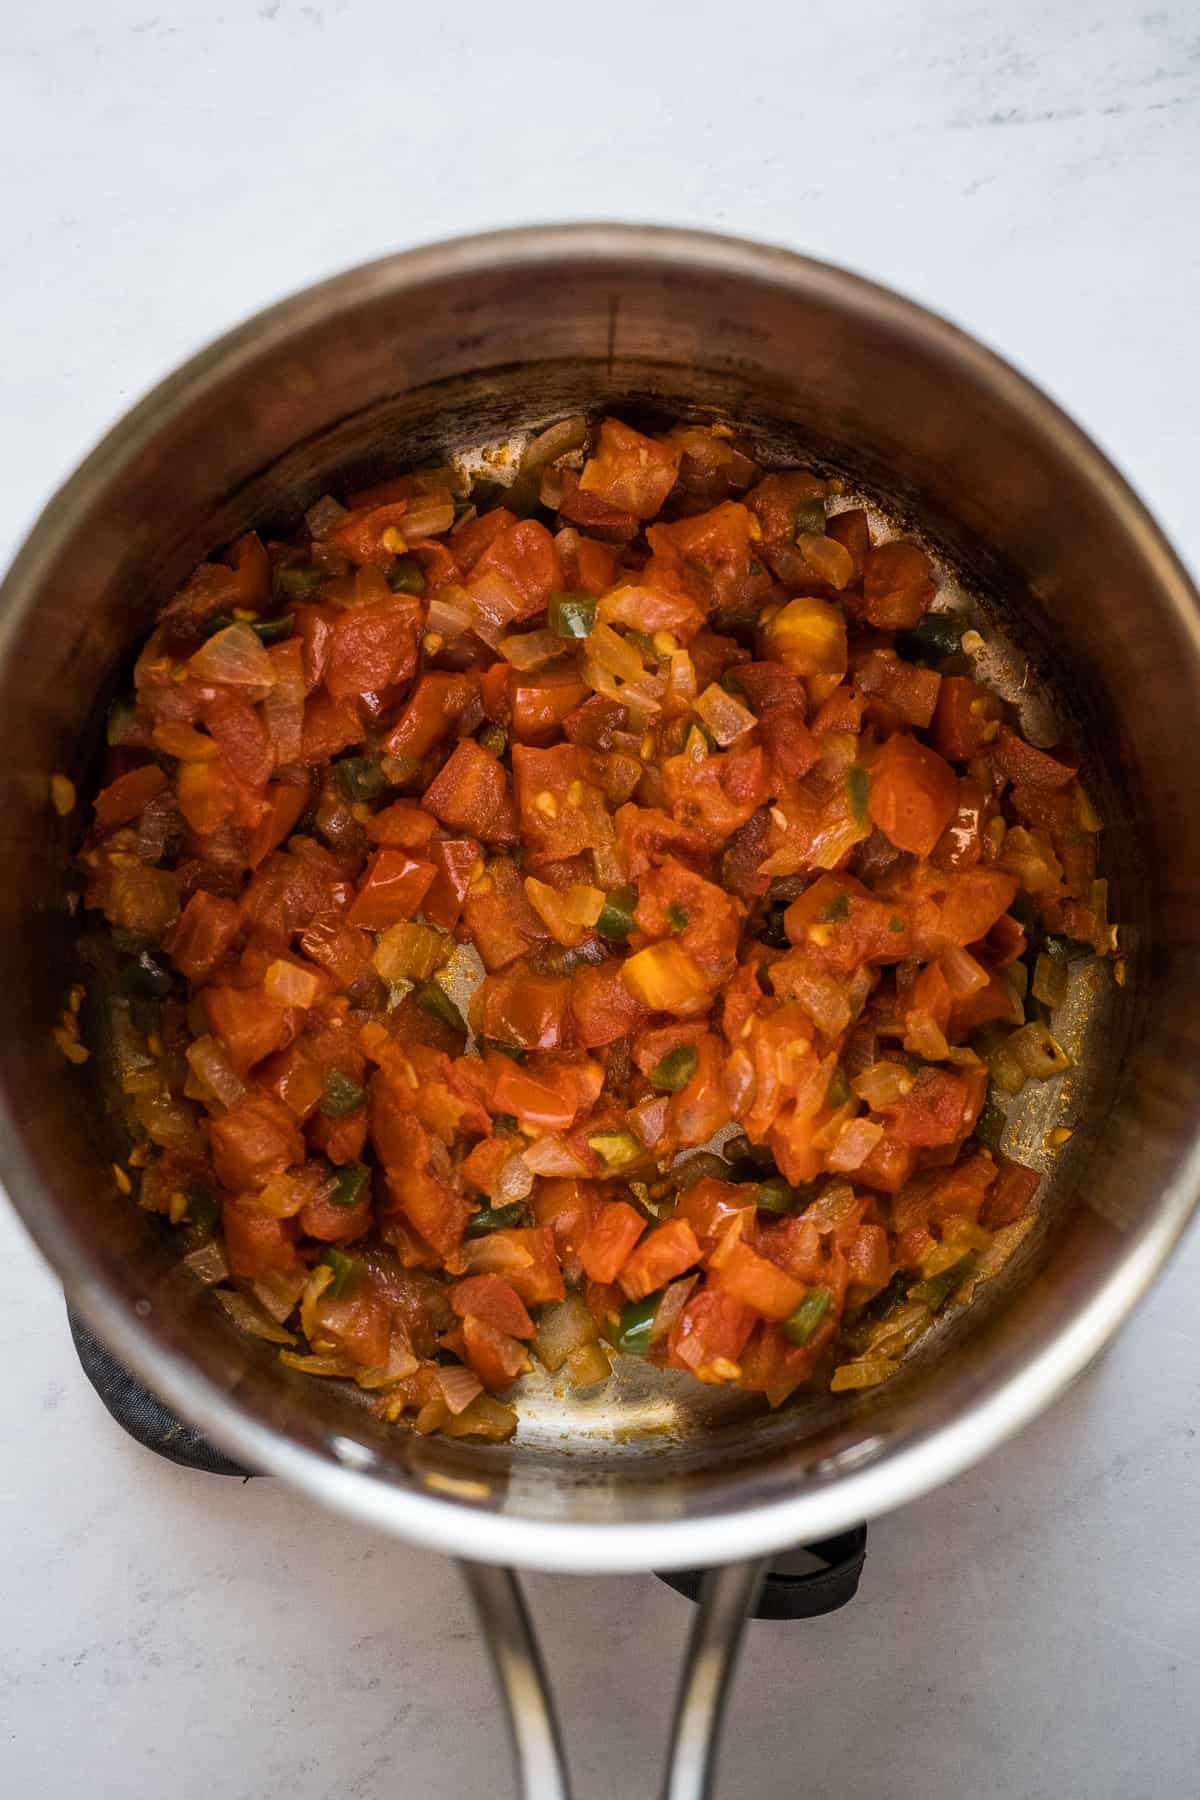 Diced tomatoes, onions, and jalapenos cooking in a small pot.